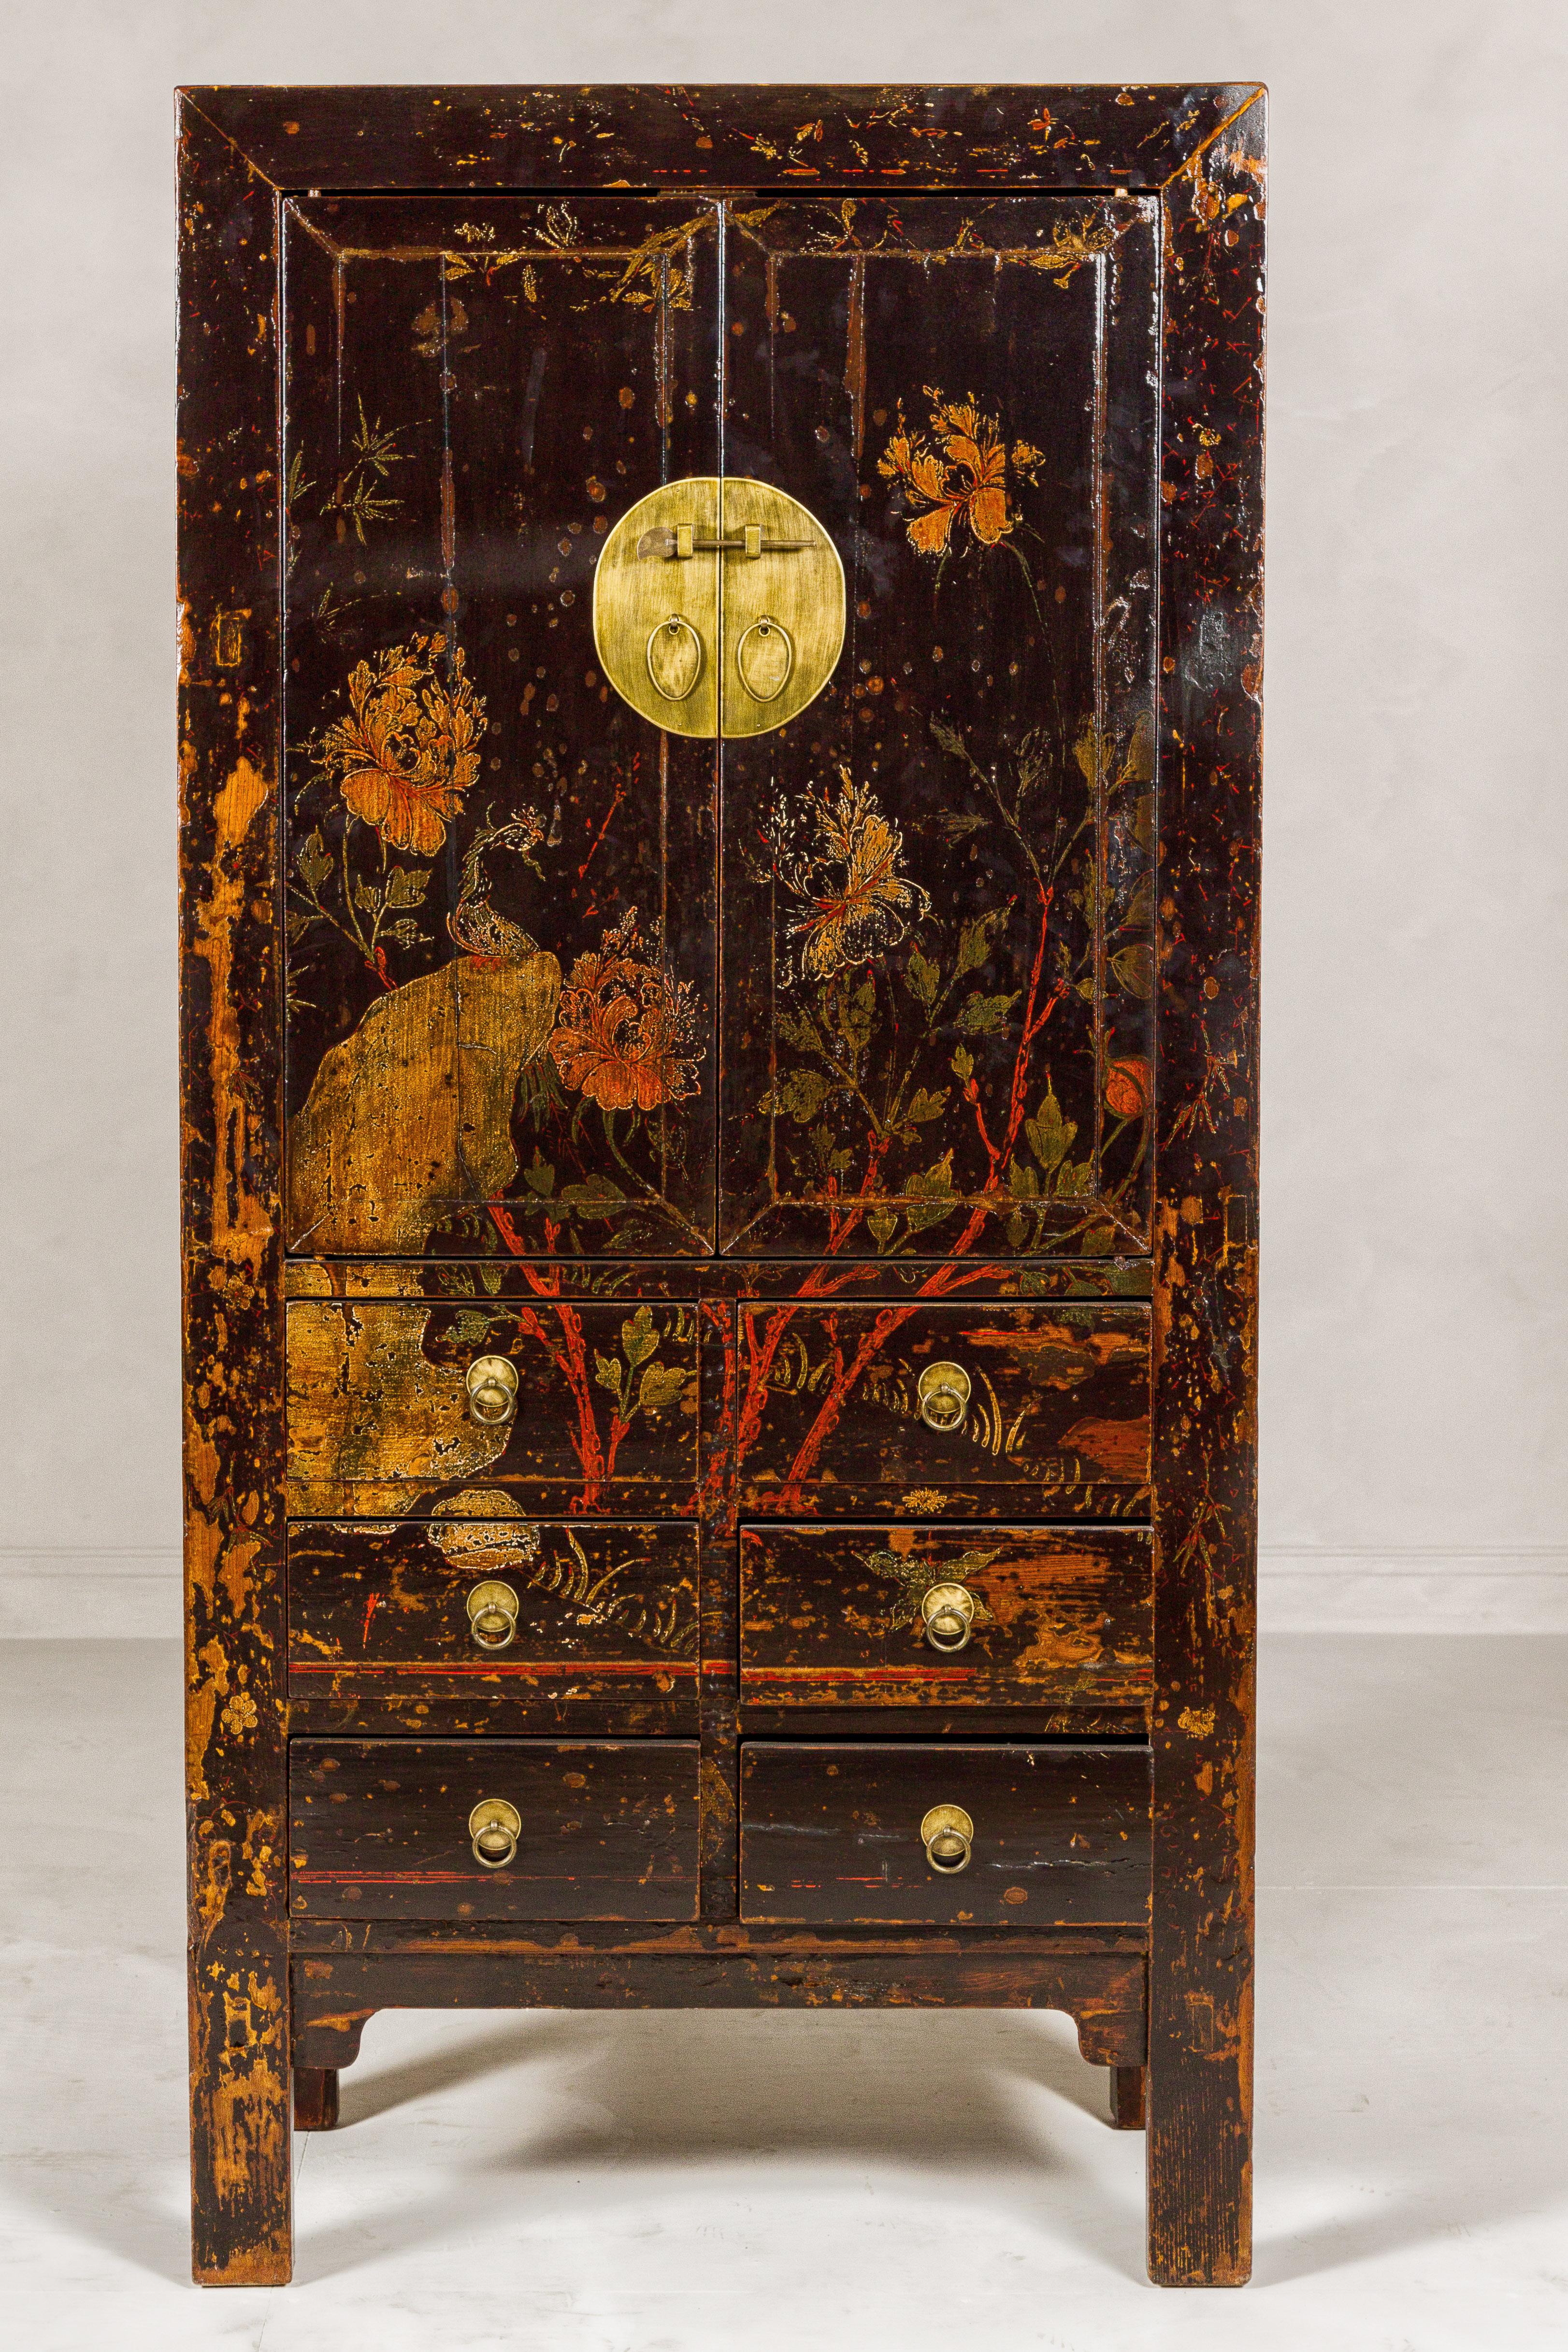 A Qing Dynasty period hand-painted cabinet from the 19th century with hand-painted floral décor, two doors and six drawers. This Qing Dynasty period cabinet from the 19th century is a captivating blend of historical elegance and artistic charm. The